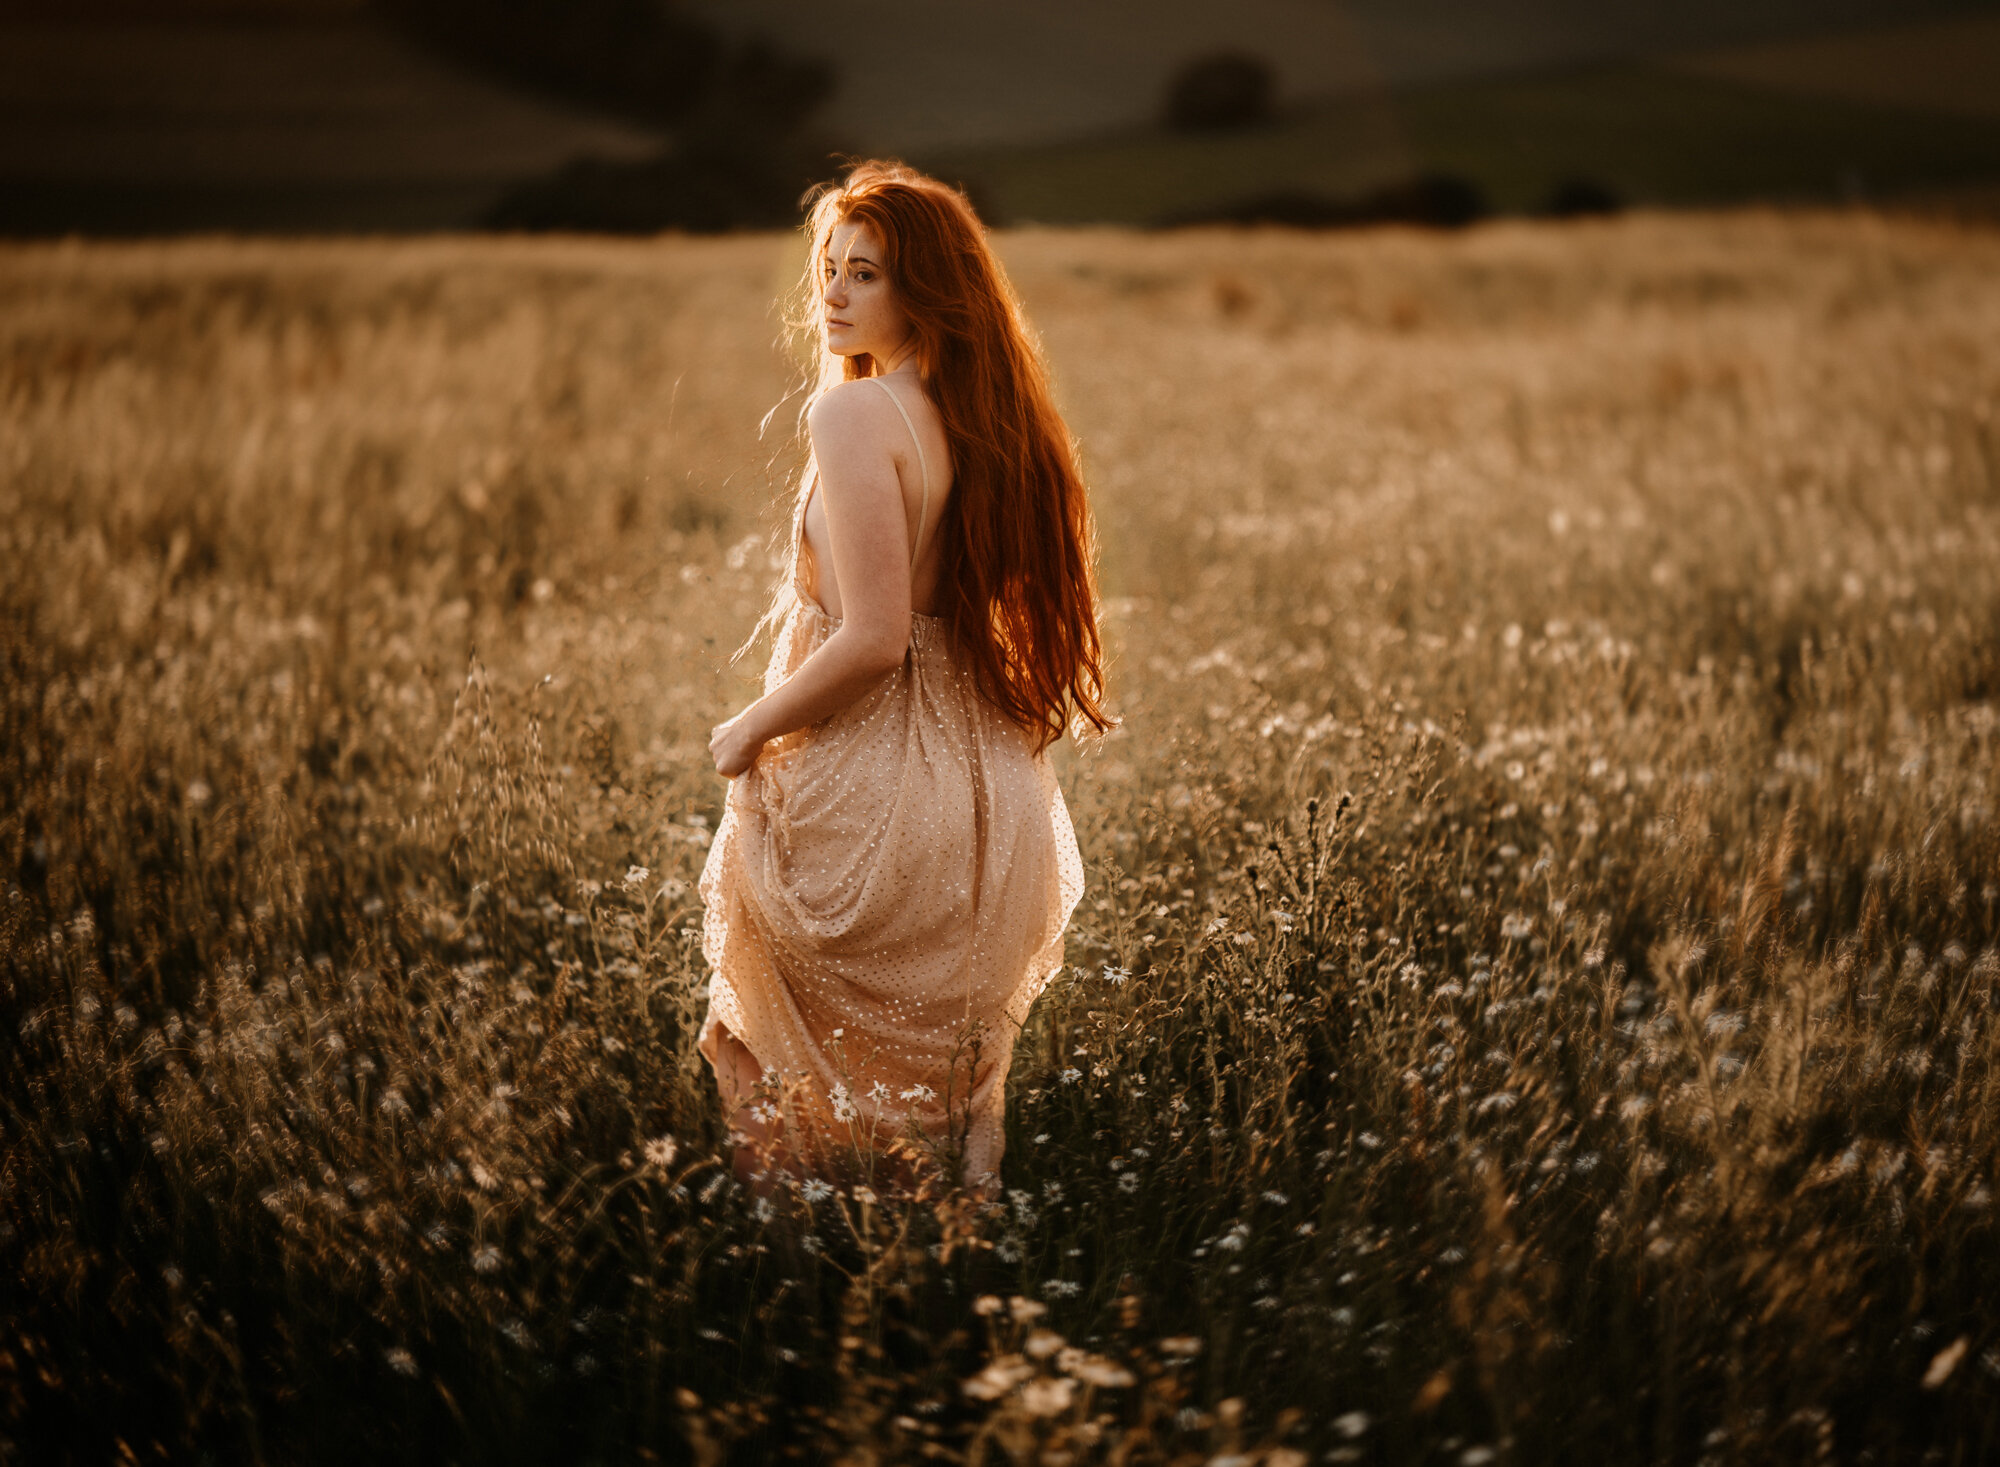  Young red head girl wearing a gold sparkling dress in a wild flower field in summer during sunset for her fine art portrait photo session by ramstein kmc photographer sarah havens, Kaiserslautern Germany 